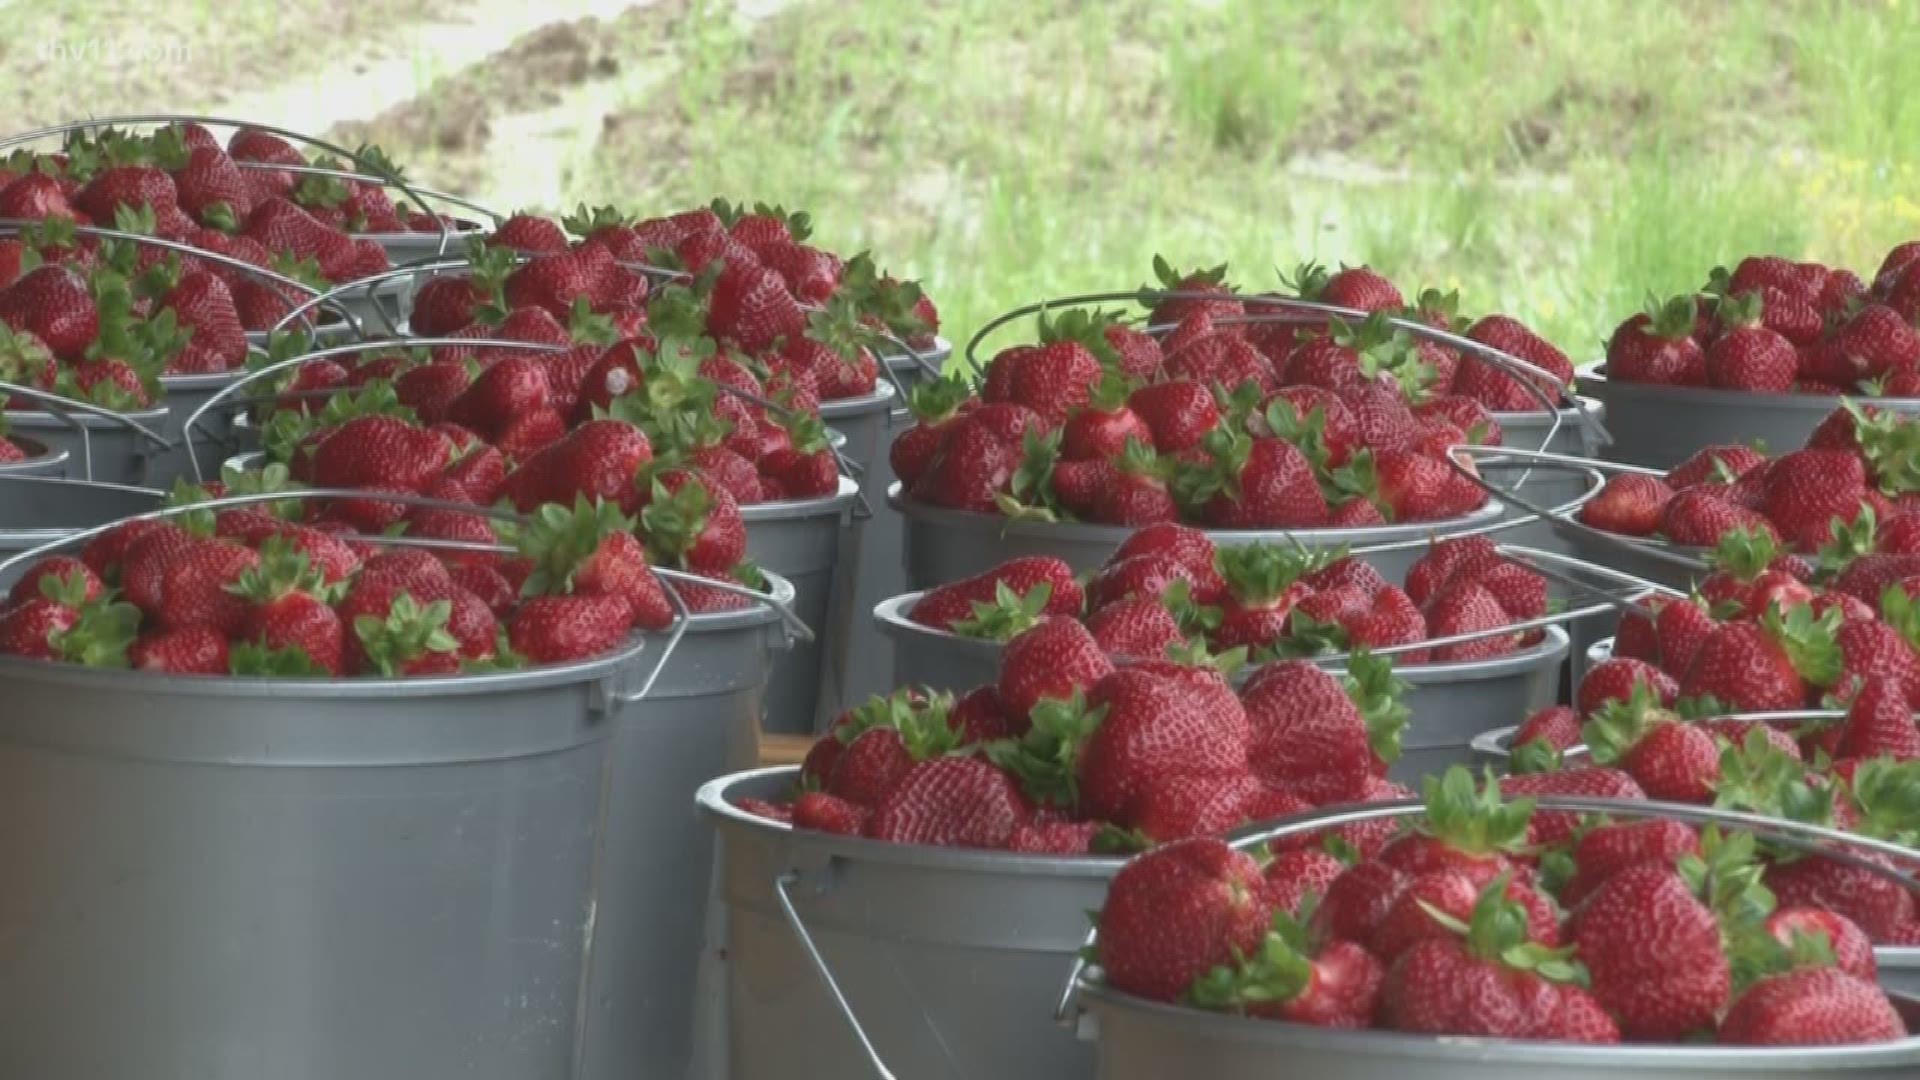 Arkansas is home to some of the tastiest strawberries, but sometimes rain can be a problem for a strawberry farm.